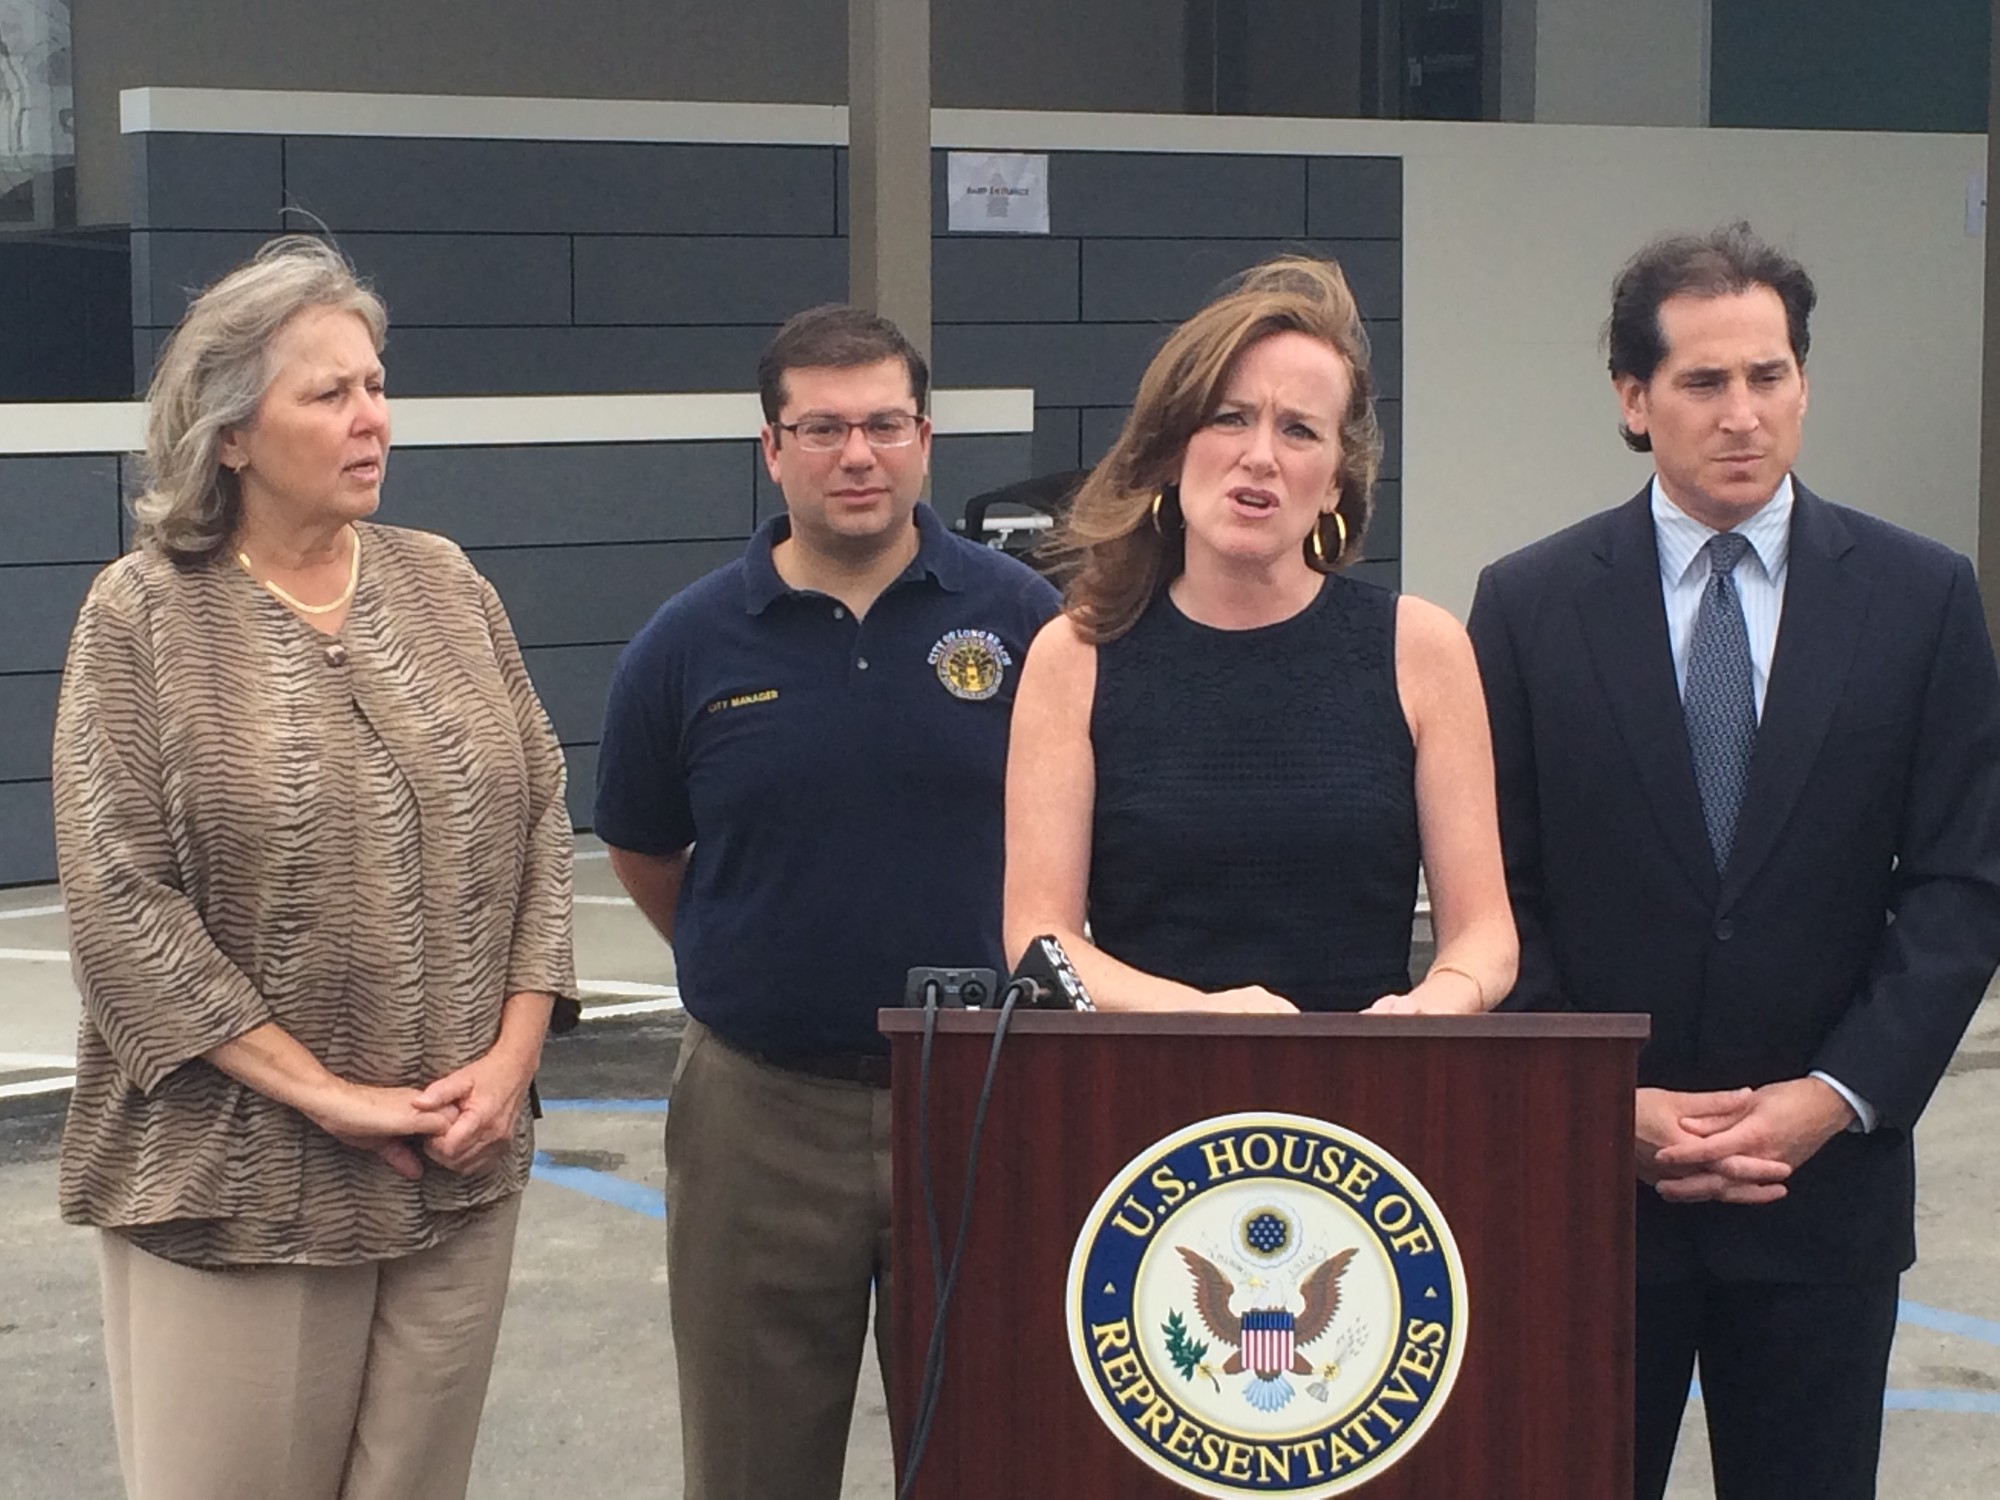 Nassau County Legislator Denise Ford, far left, Long Beach City Manager Jack Schnirman, U.S. Rep. Kathleen Rice and State Assemblyman Todd Kaminsky called for federal approval of an emergency department at the former Long Beach Medical Center campus at a press conference last month.